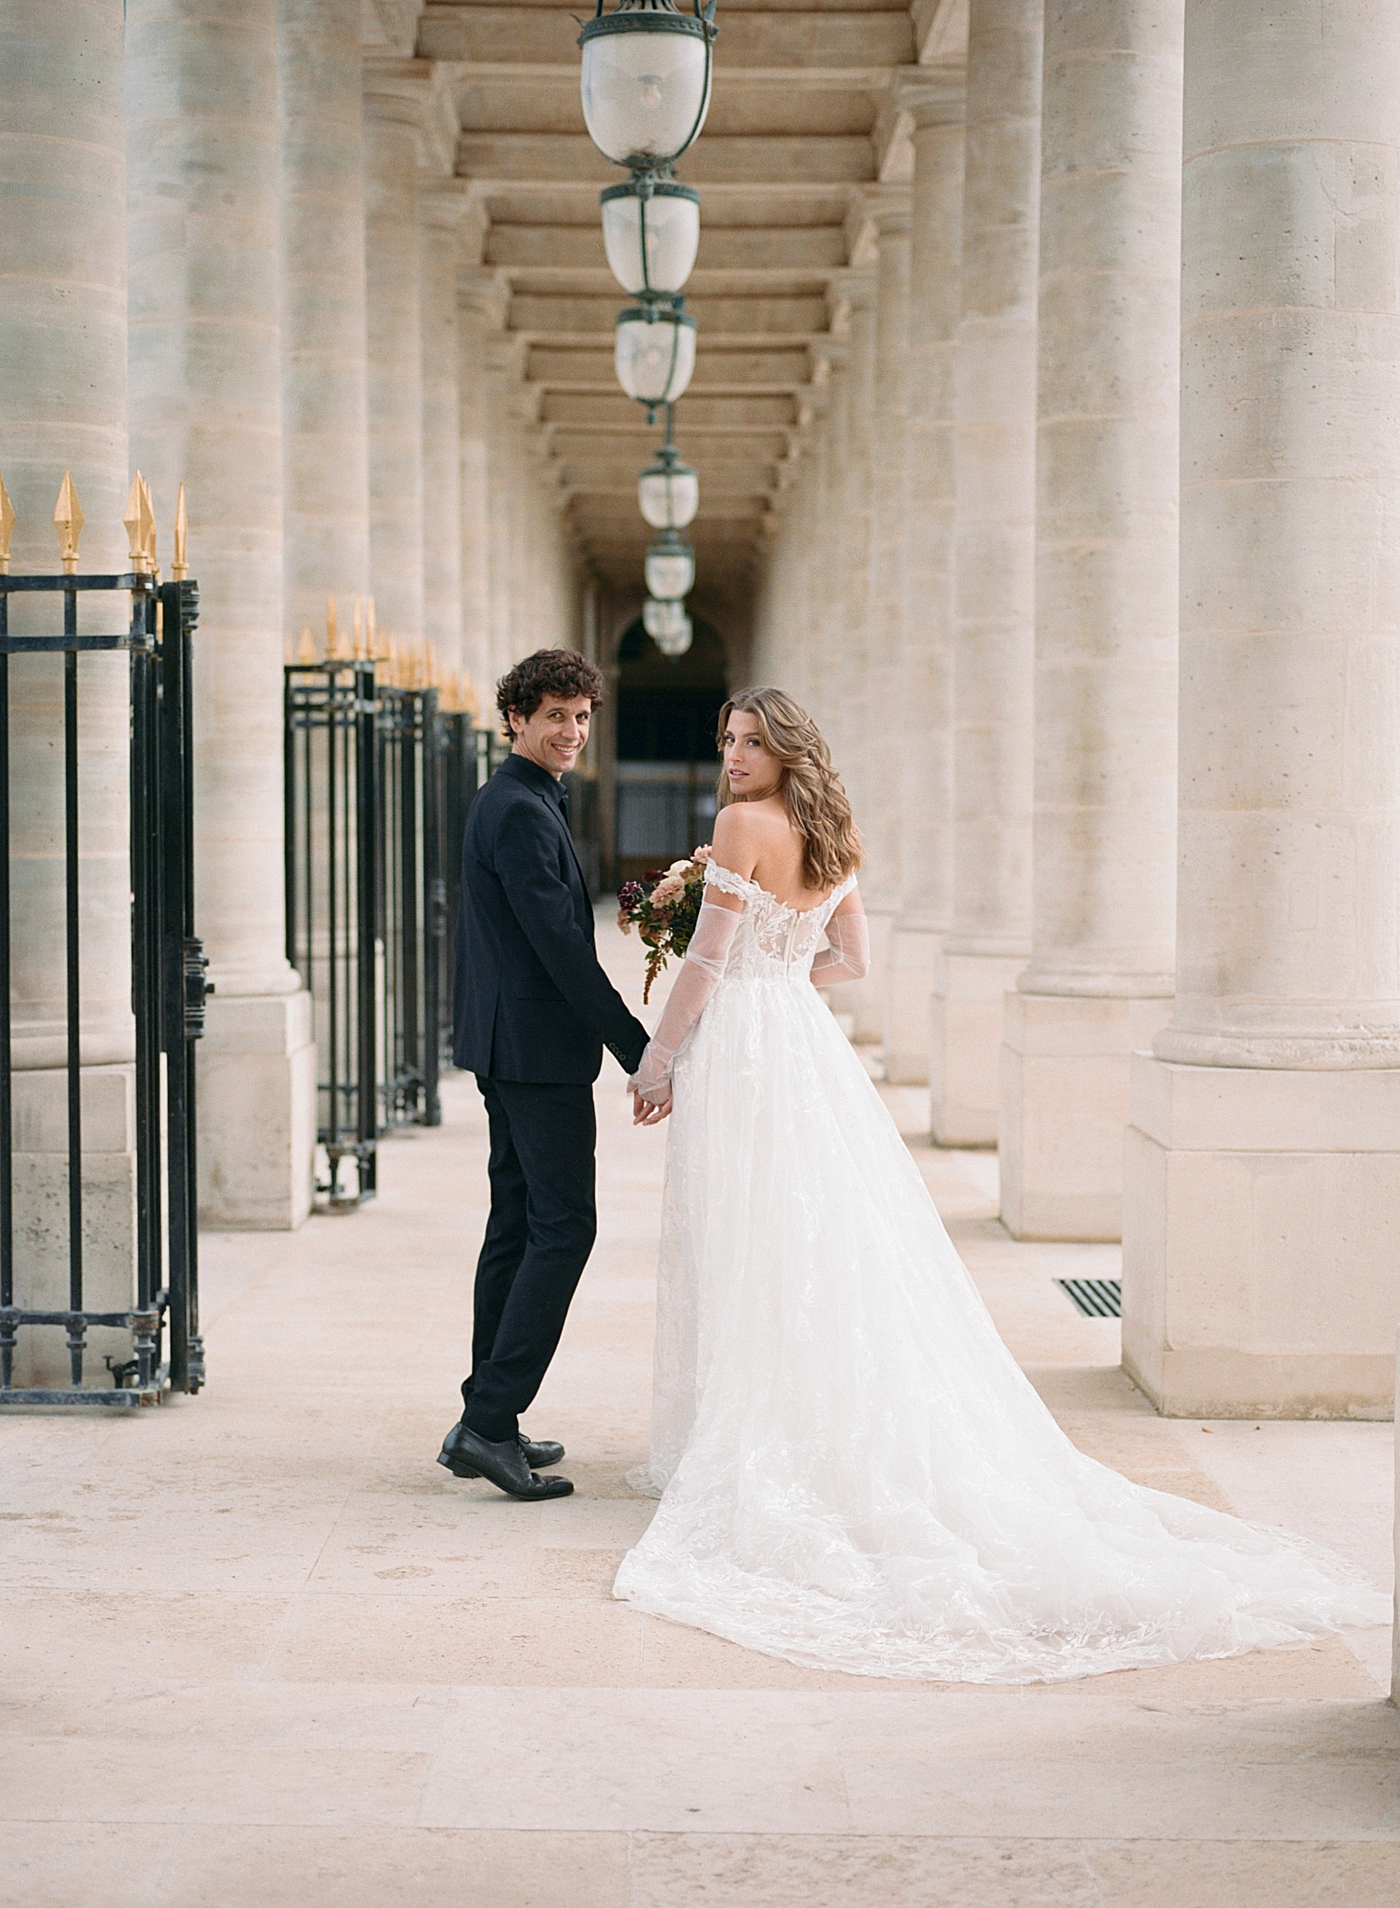 Image of a bride and groom holding hands and smiling back at the camera while walking away down an outdoor, sunlit, concrete corridor | Image by Hope Helmuth Photography